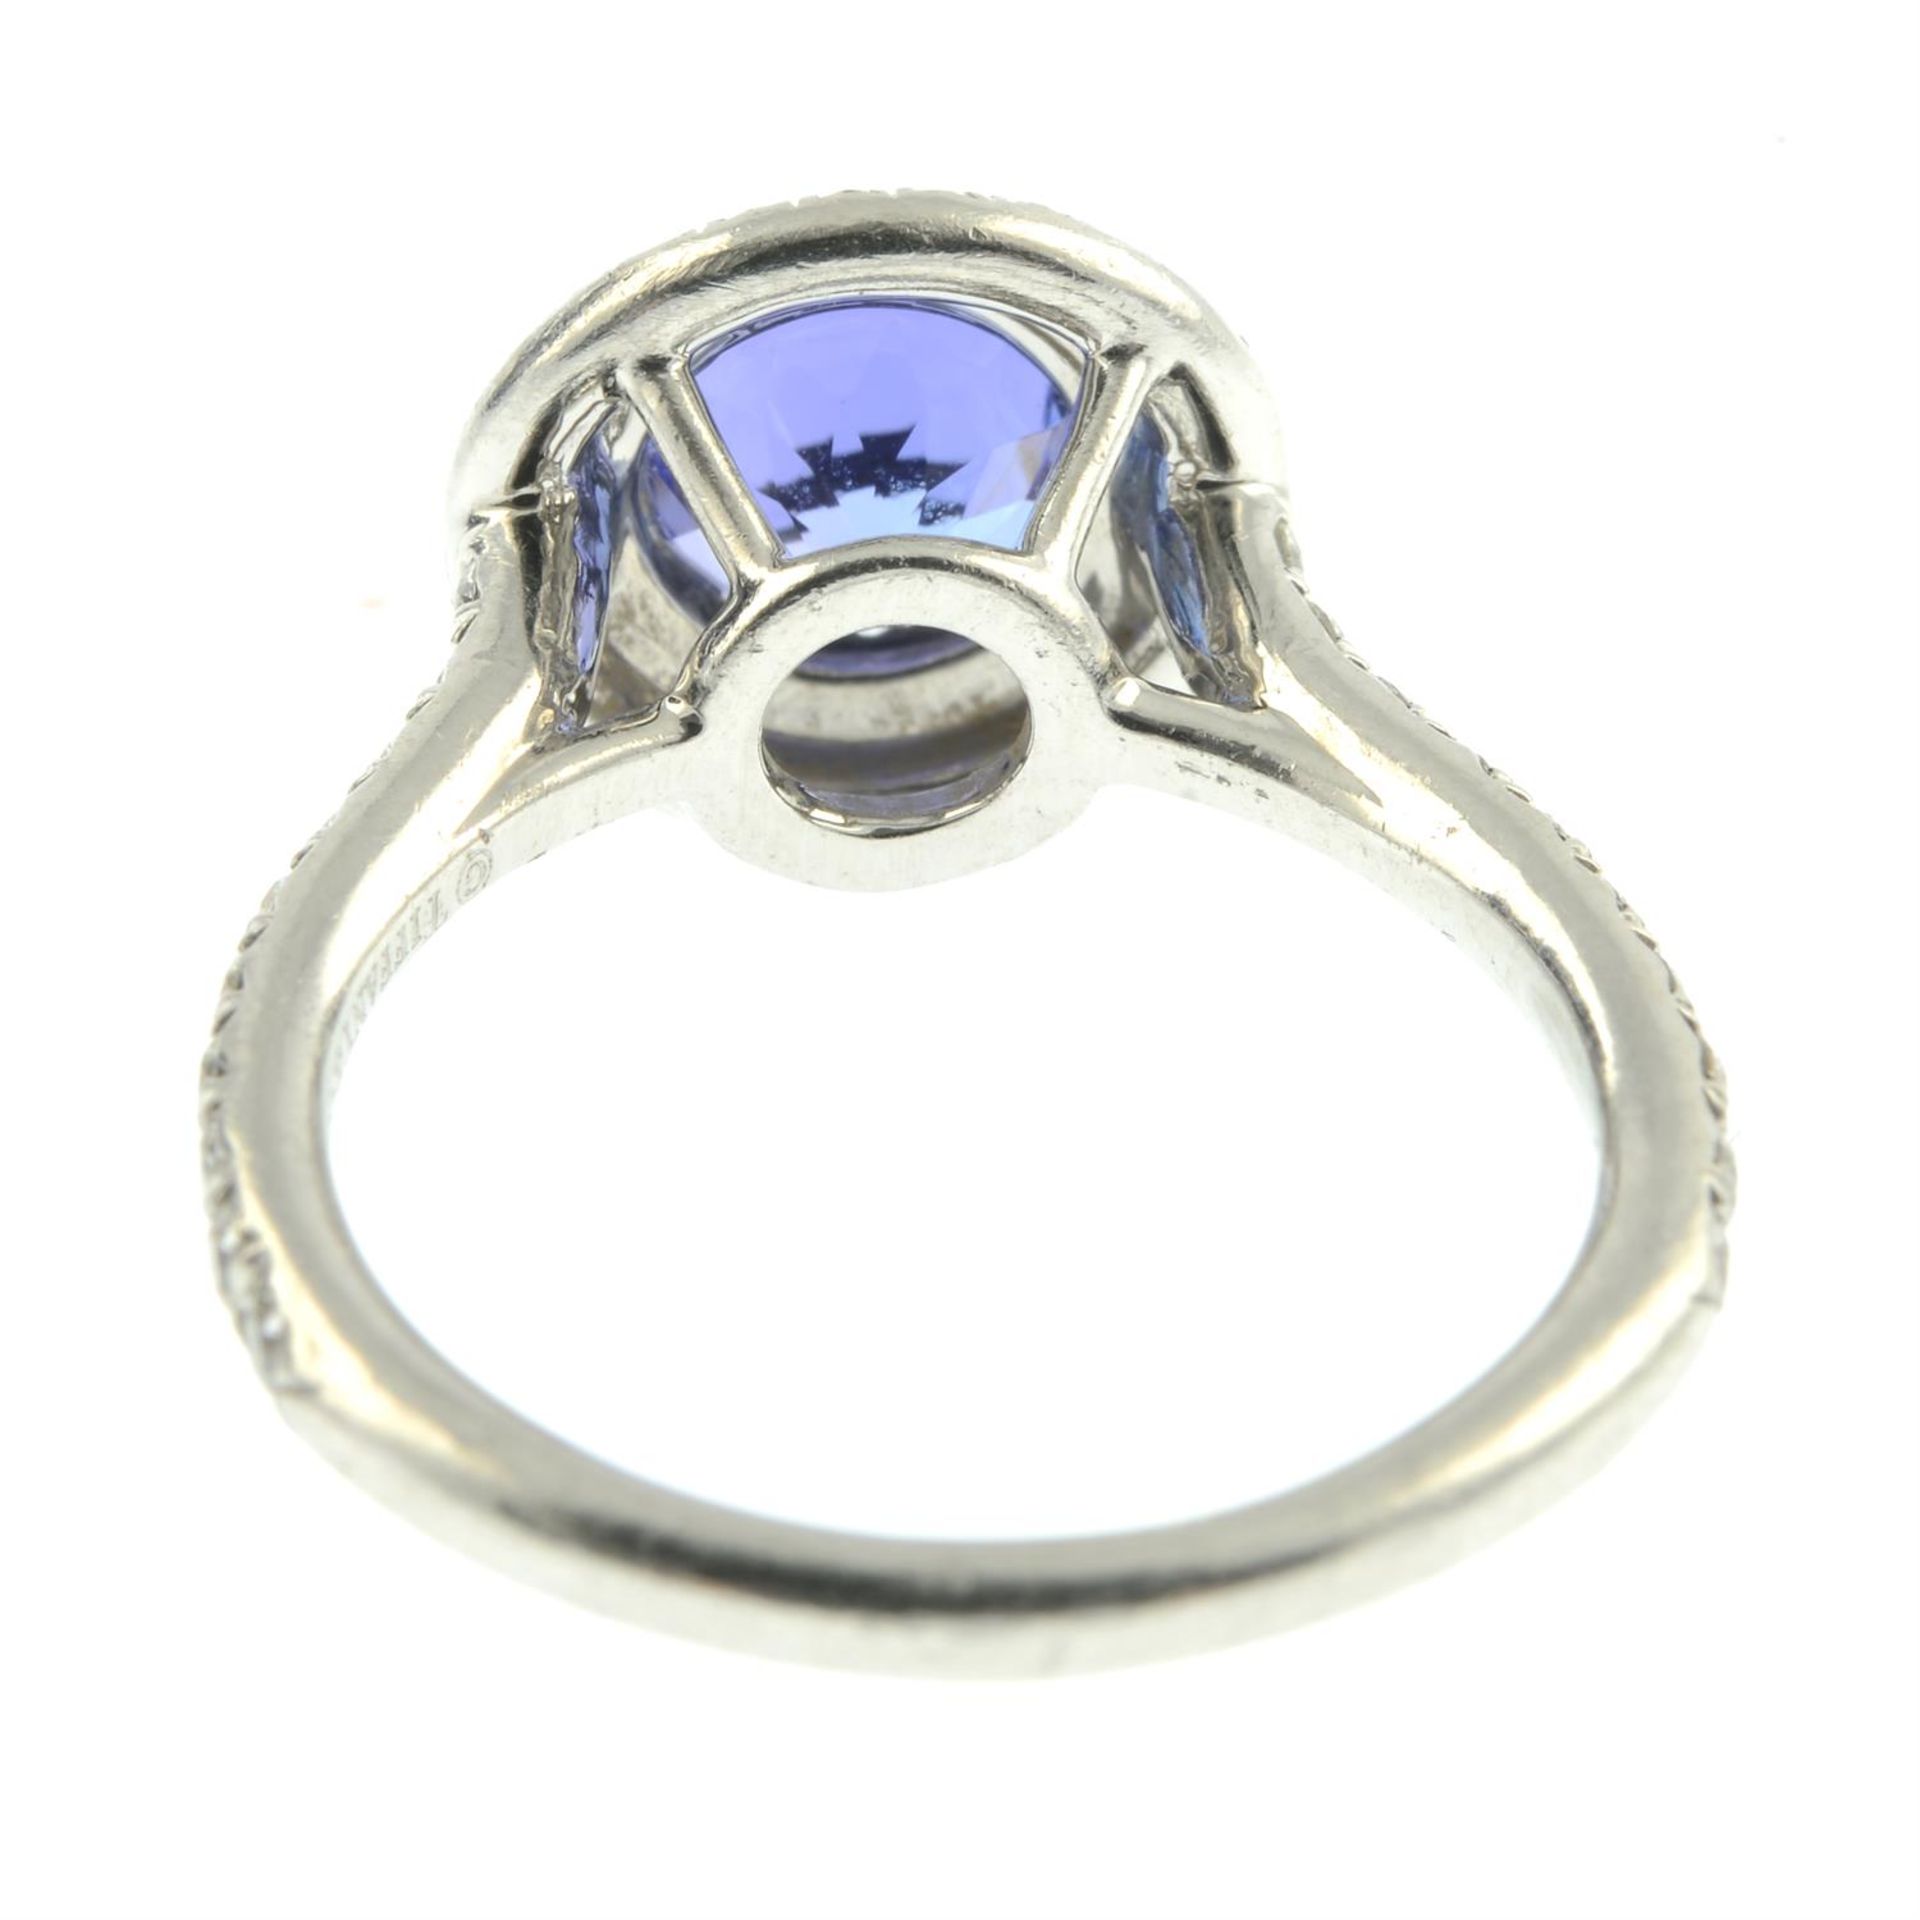 A platinum tanzanite and brilliant-cut diamond cluster ring, by Tiffany & Co. - Image 4 of 5